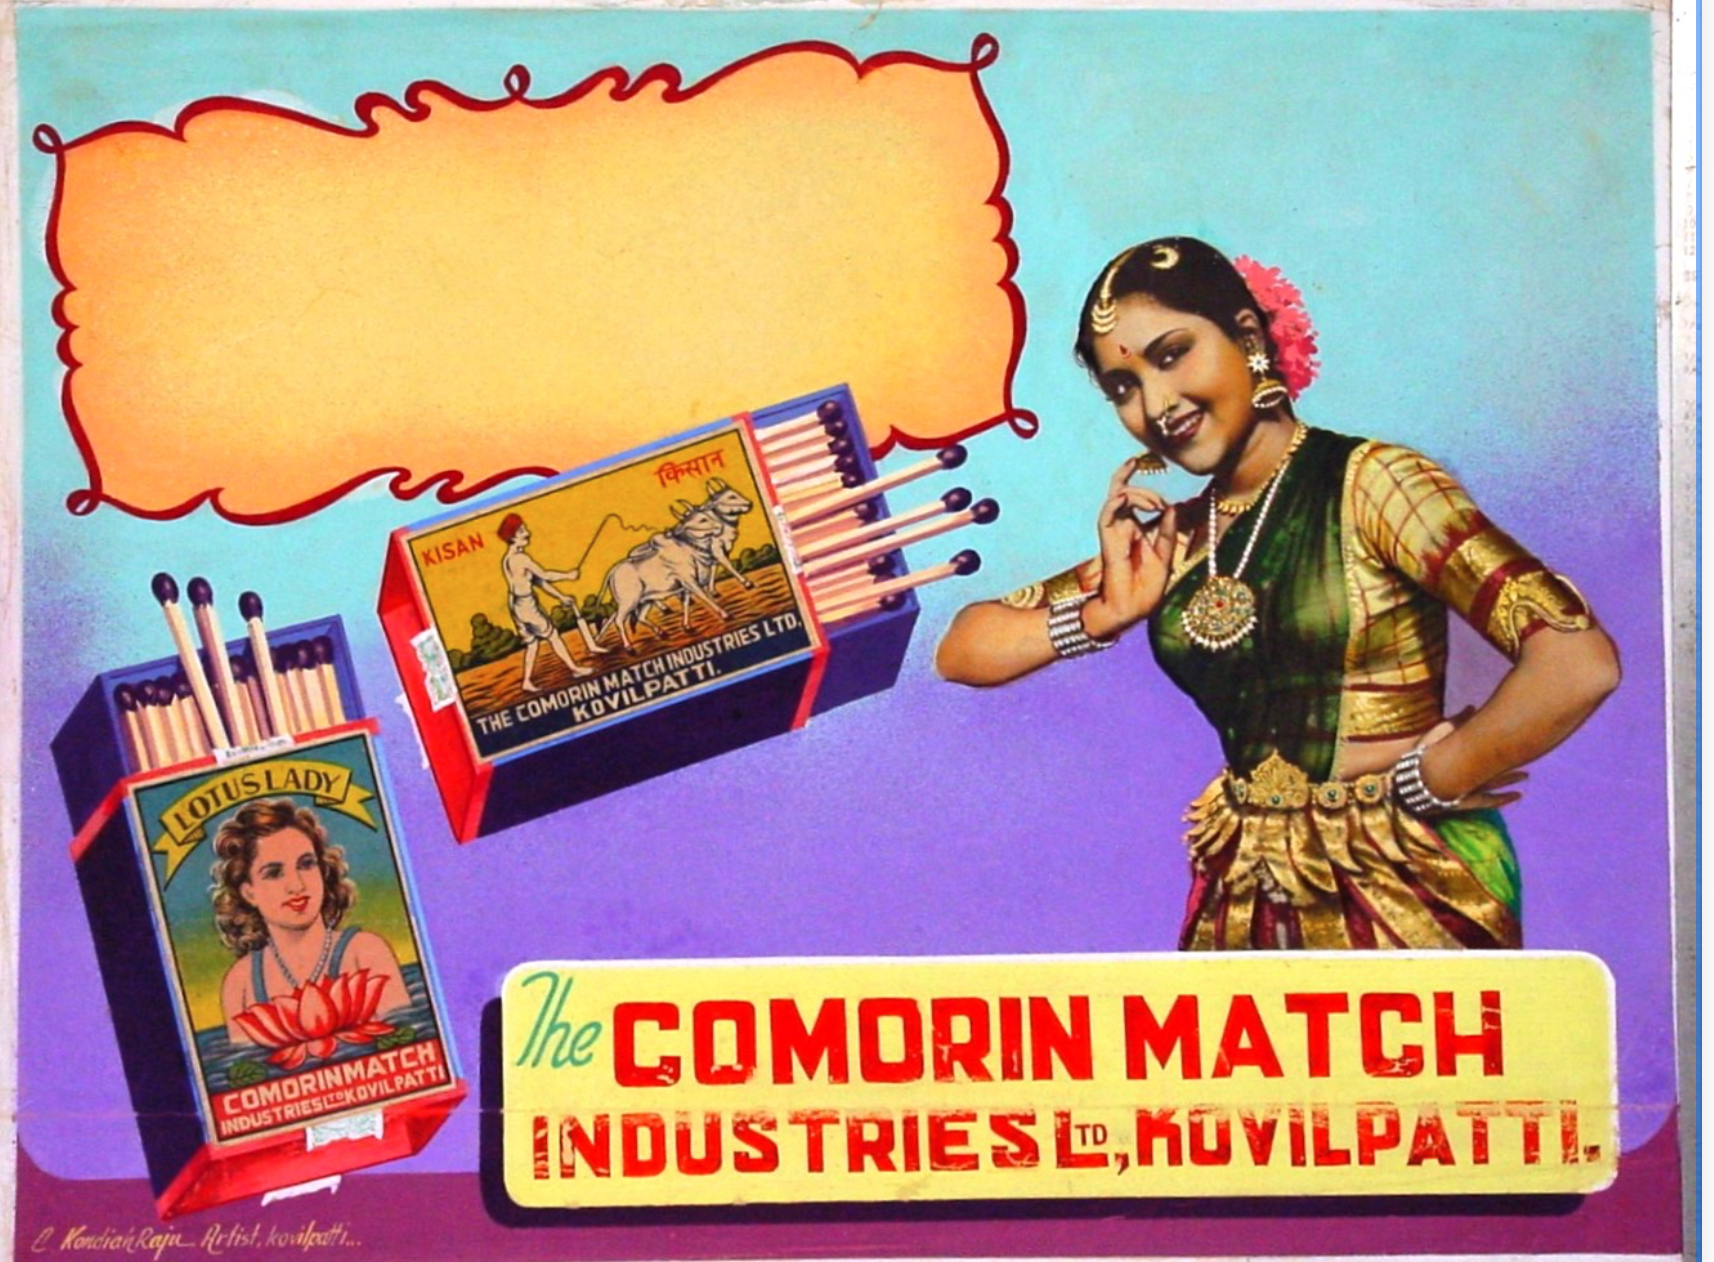 Print materials from the Kovilpatti exhibition